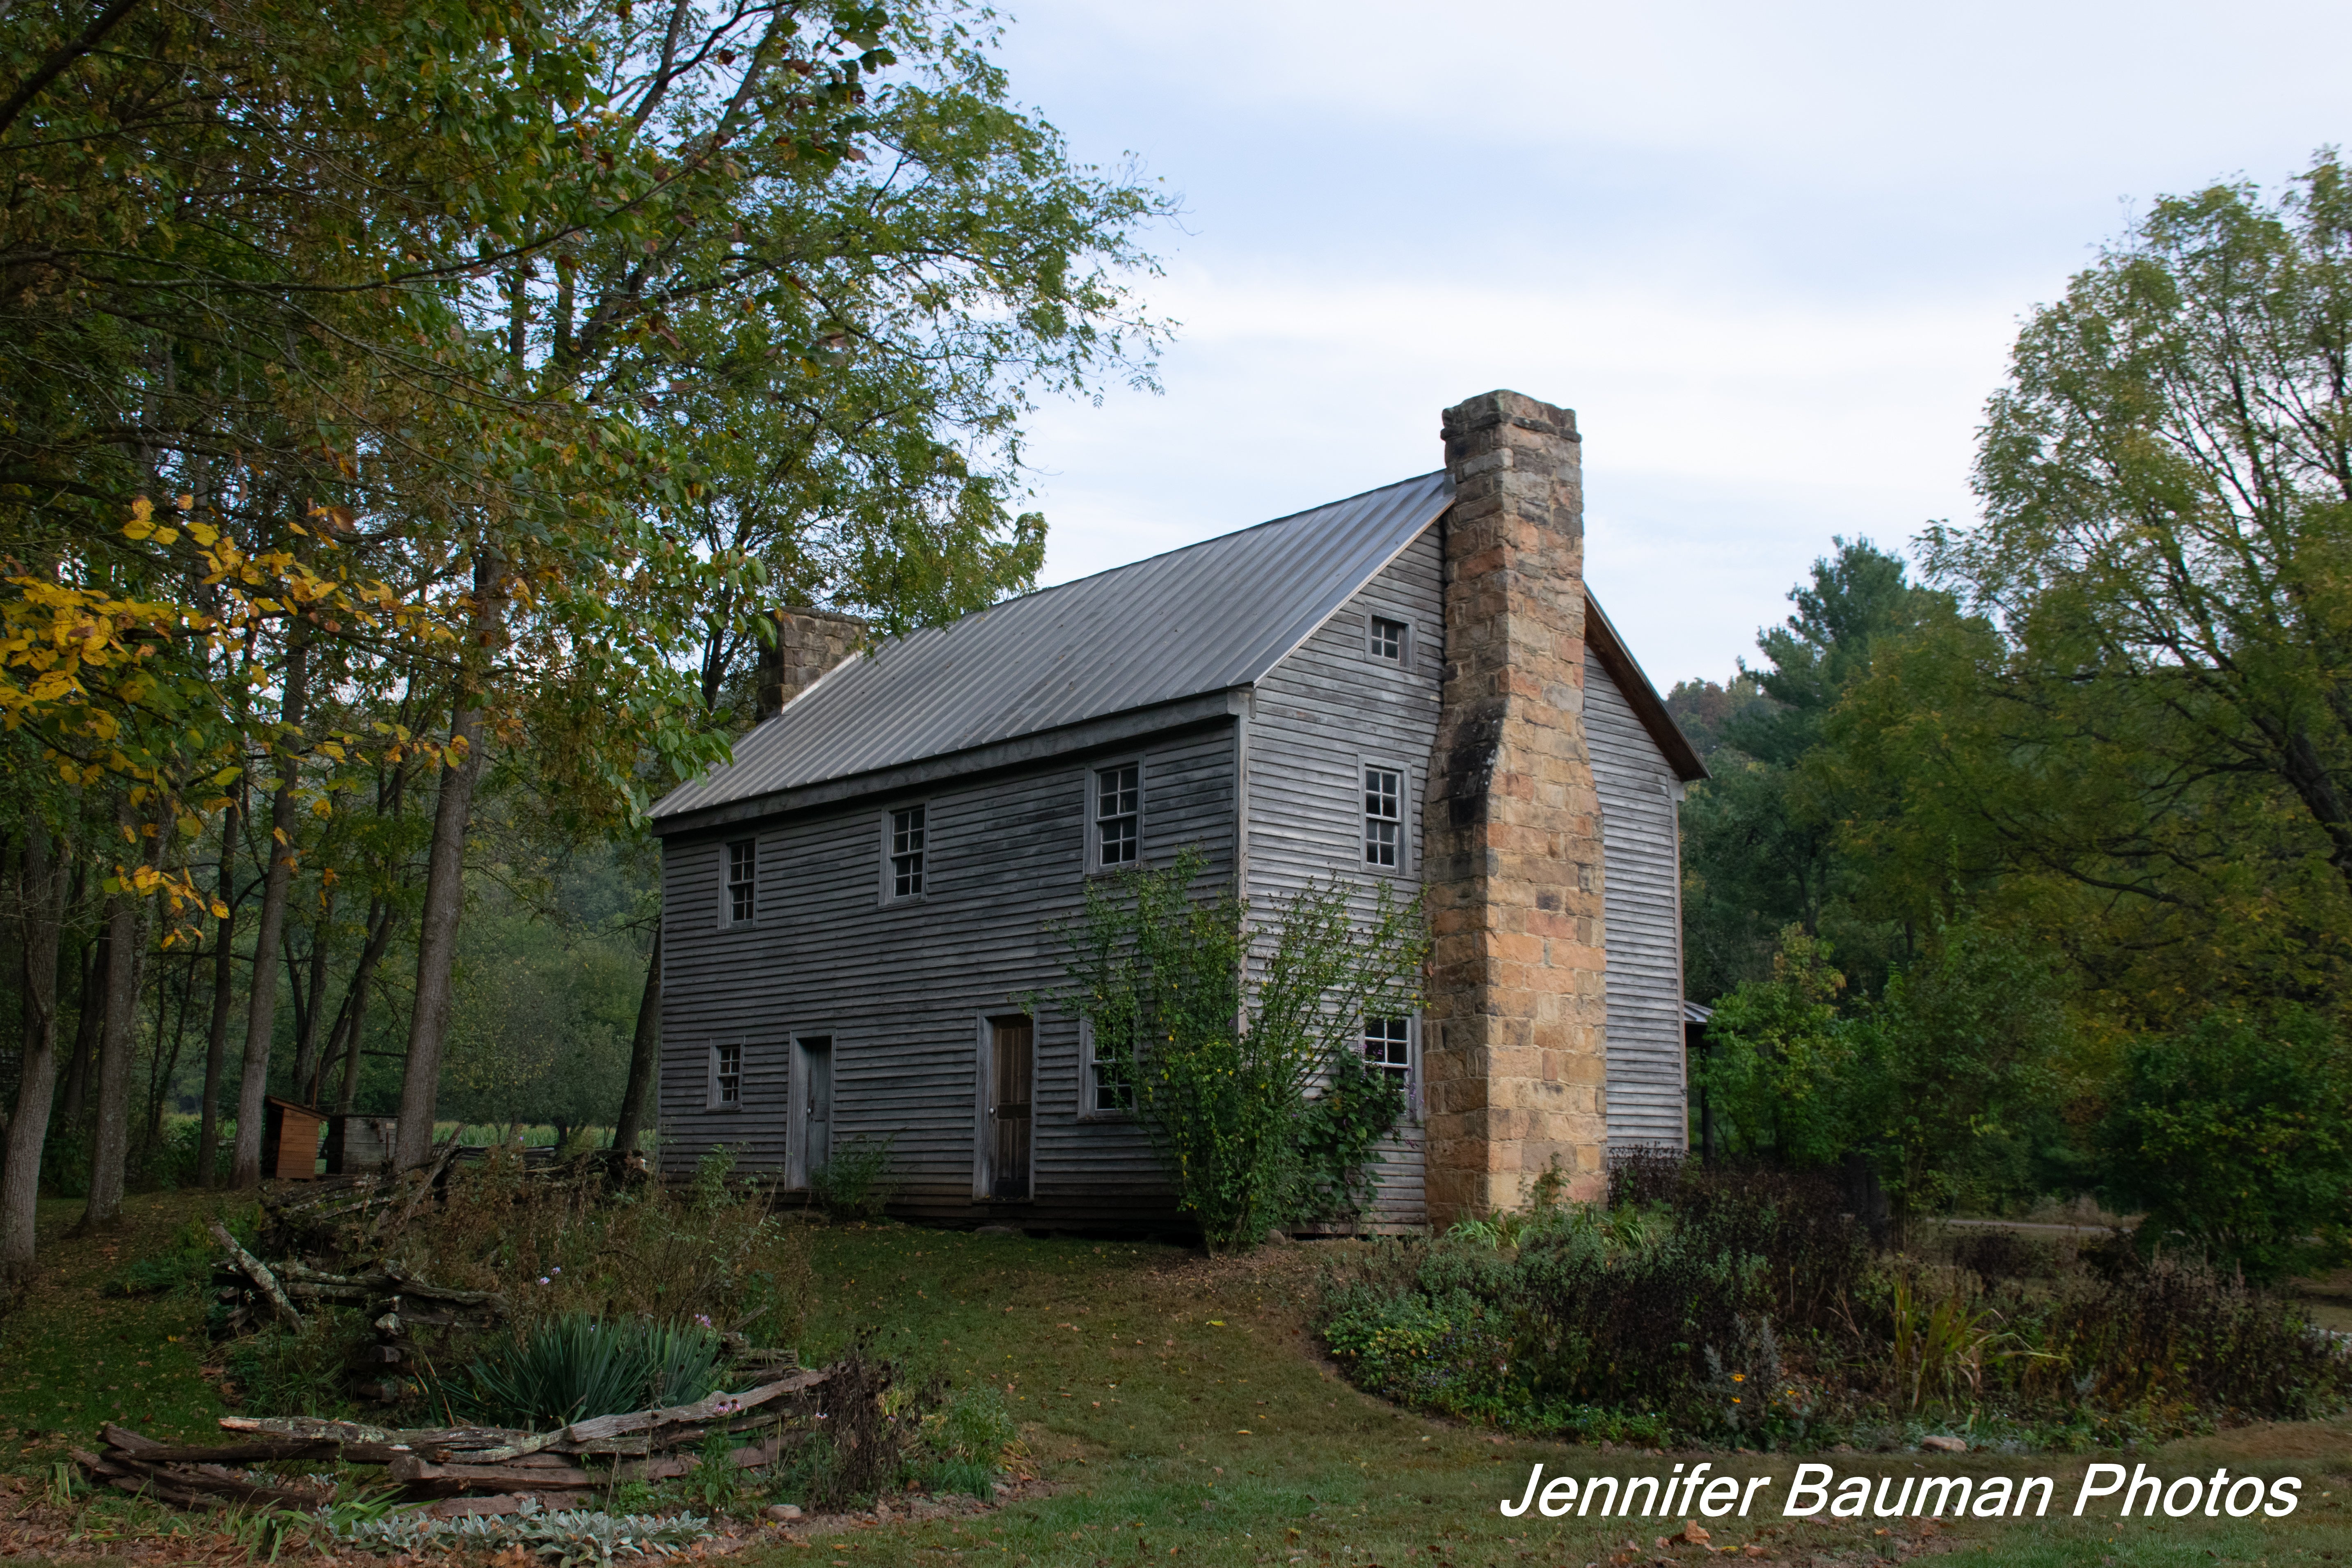 Jacob Sites homestead, built in the 1830's at the base of Seneca Rocks.